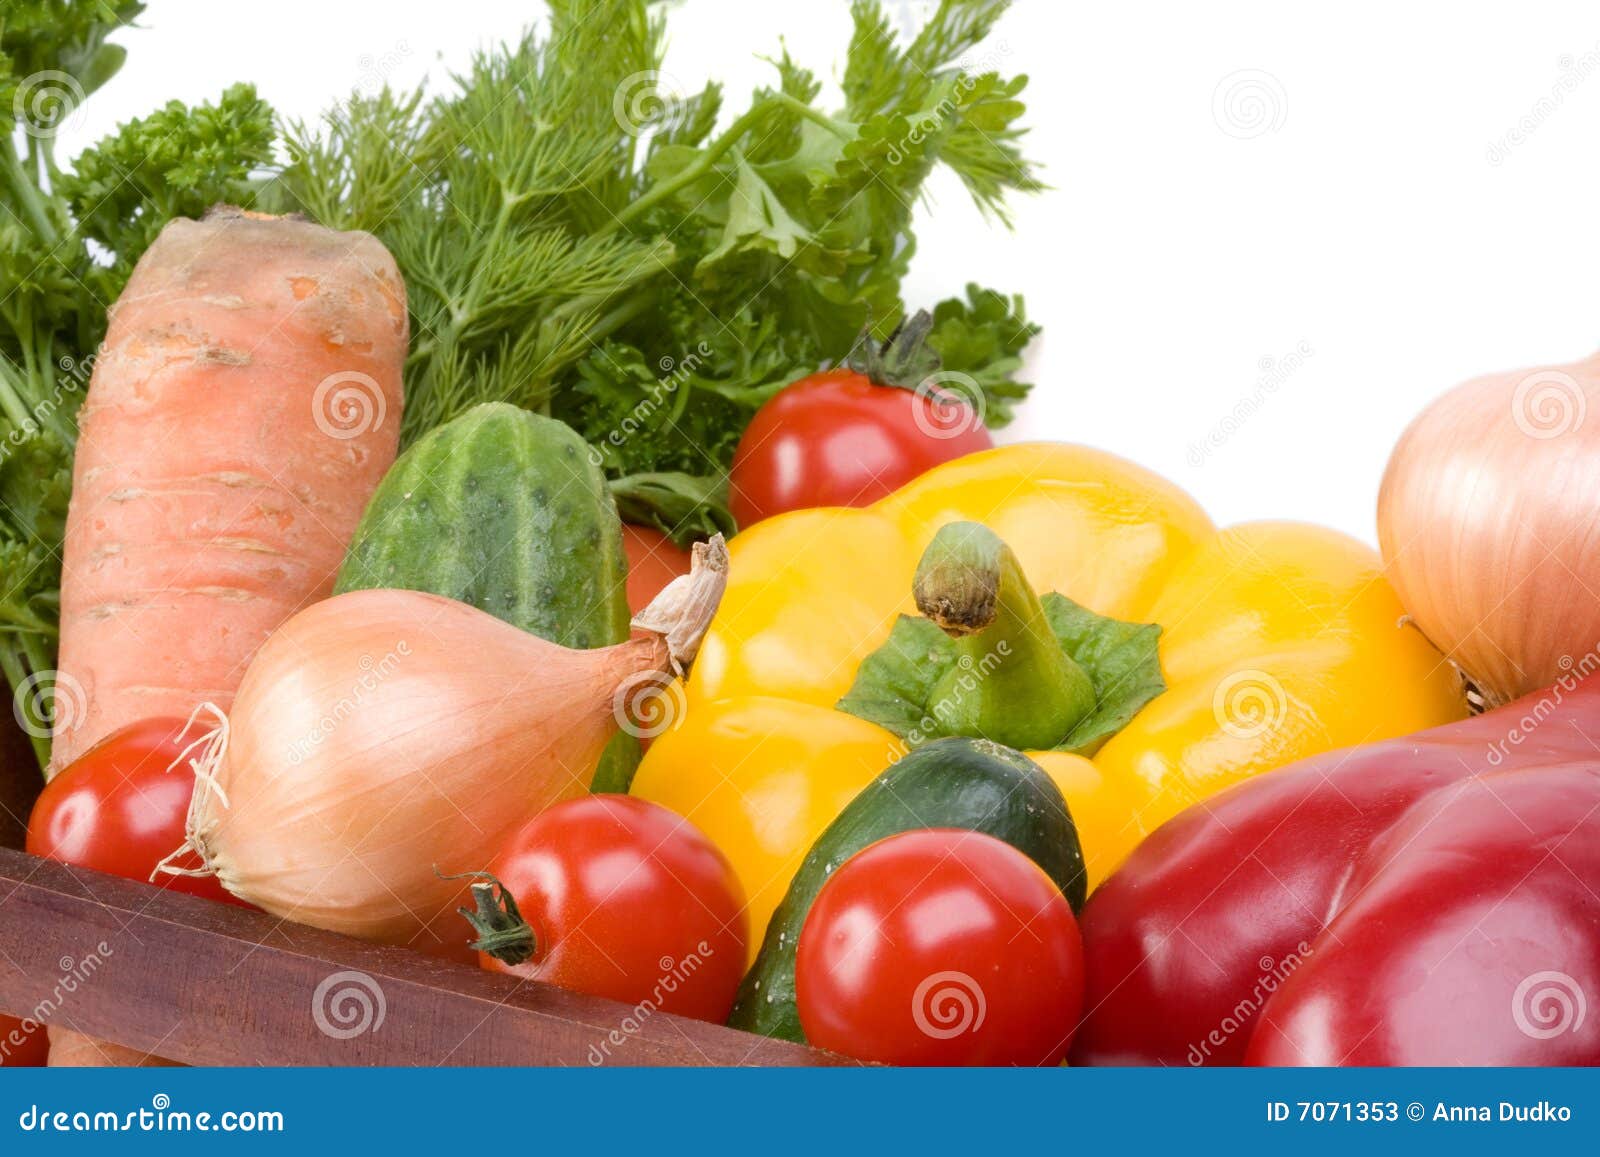 Vegetable collection stock image. Image of cucumber, background - 7071353